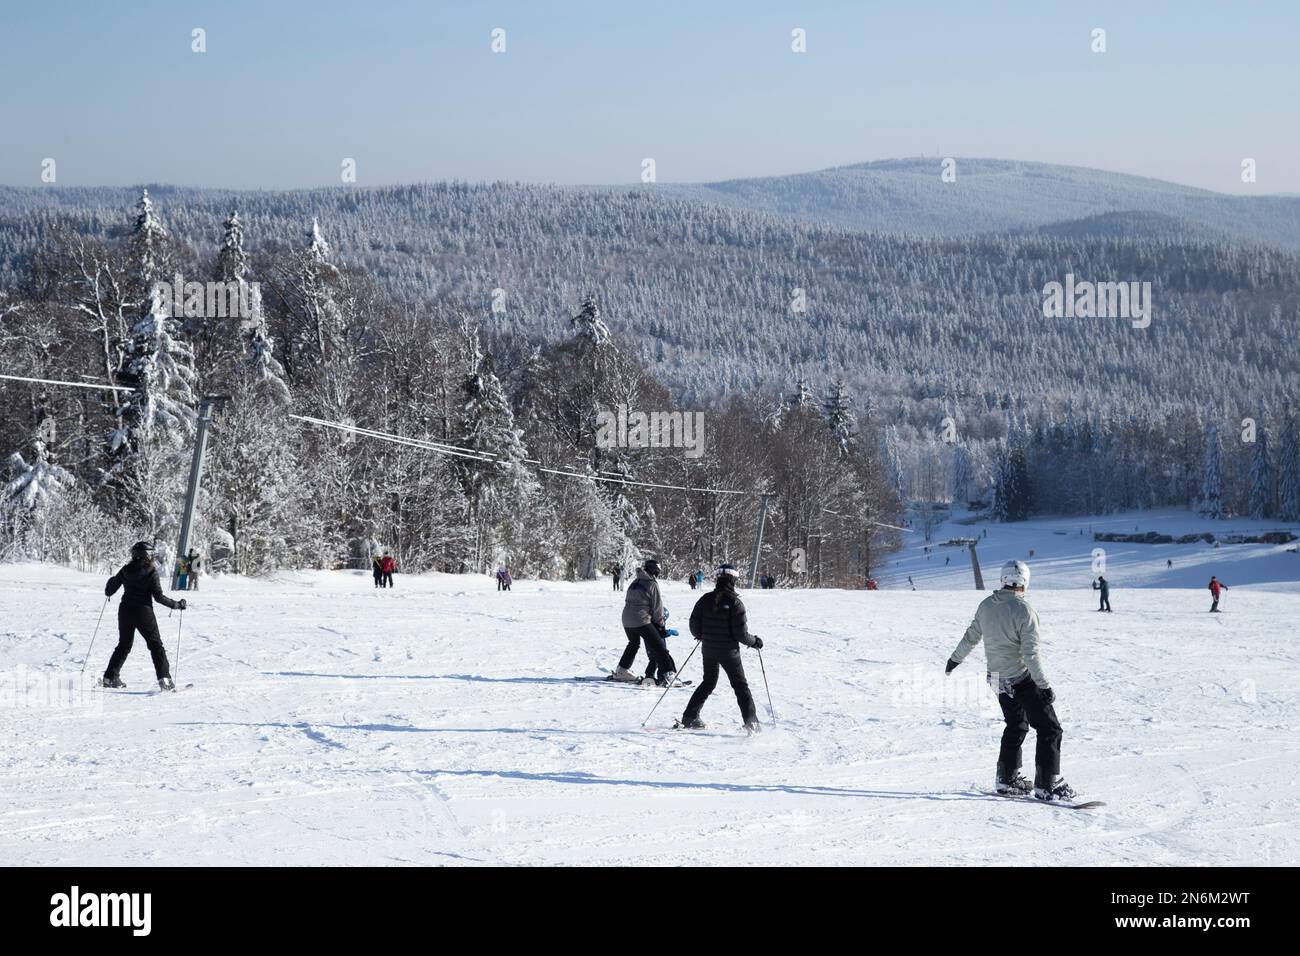 sports, sport, alpine, nice weather, lifestyle, outdoor, ski touring, winter time, snow covered, snowy, frost, cold, exercise, europe, forest, winter, Stock Photo